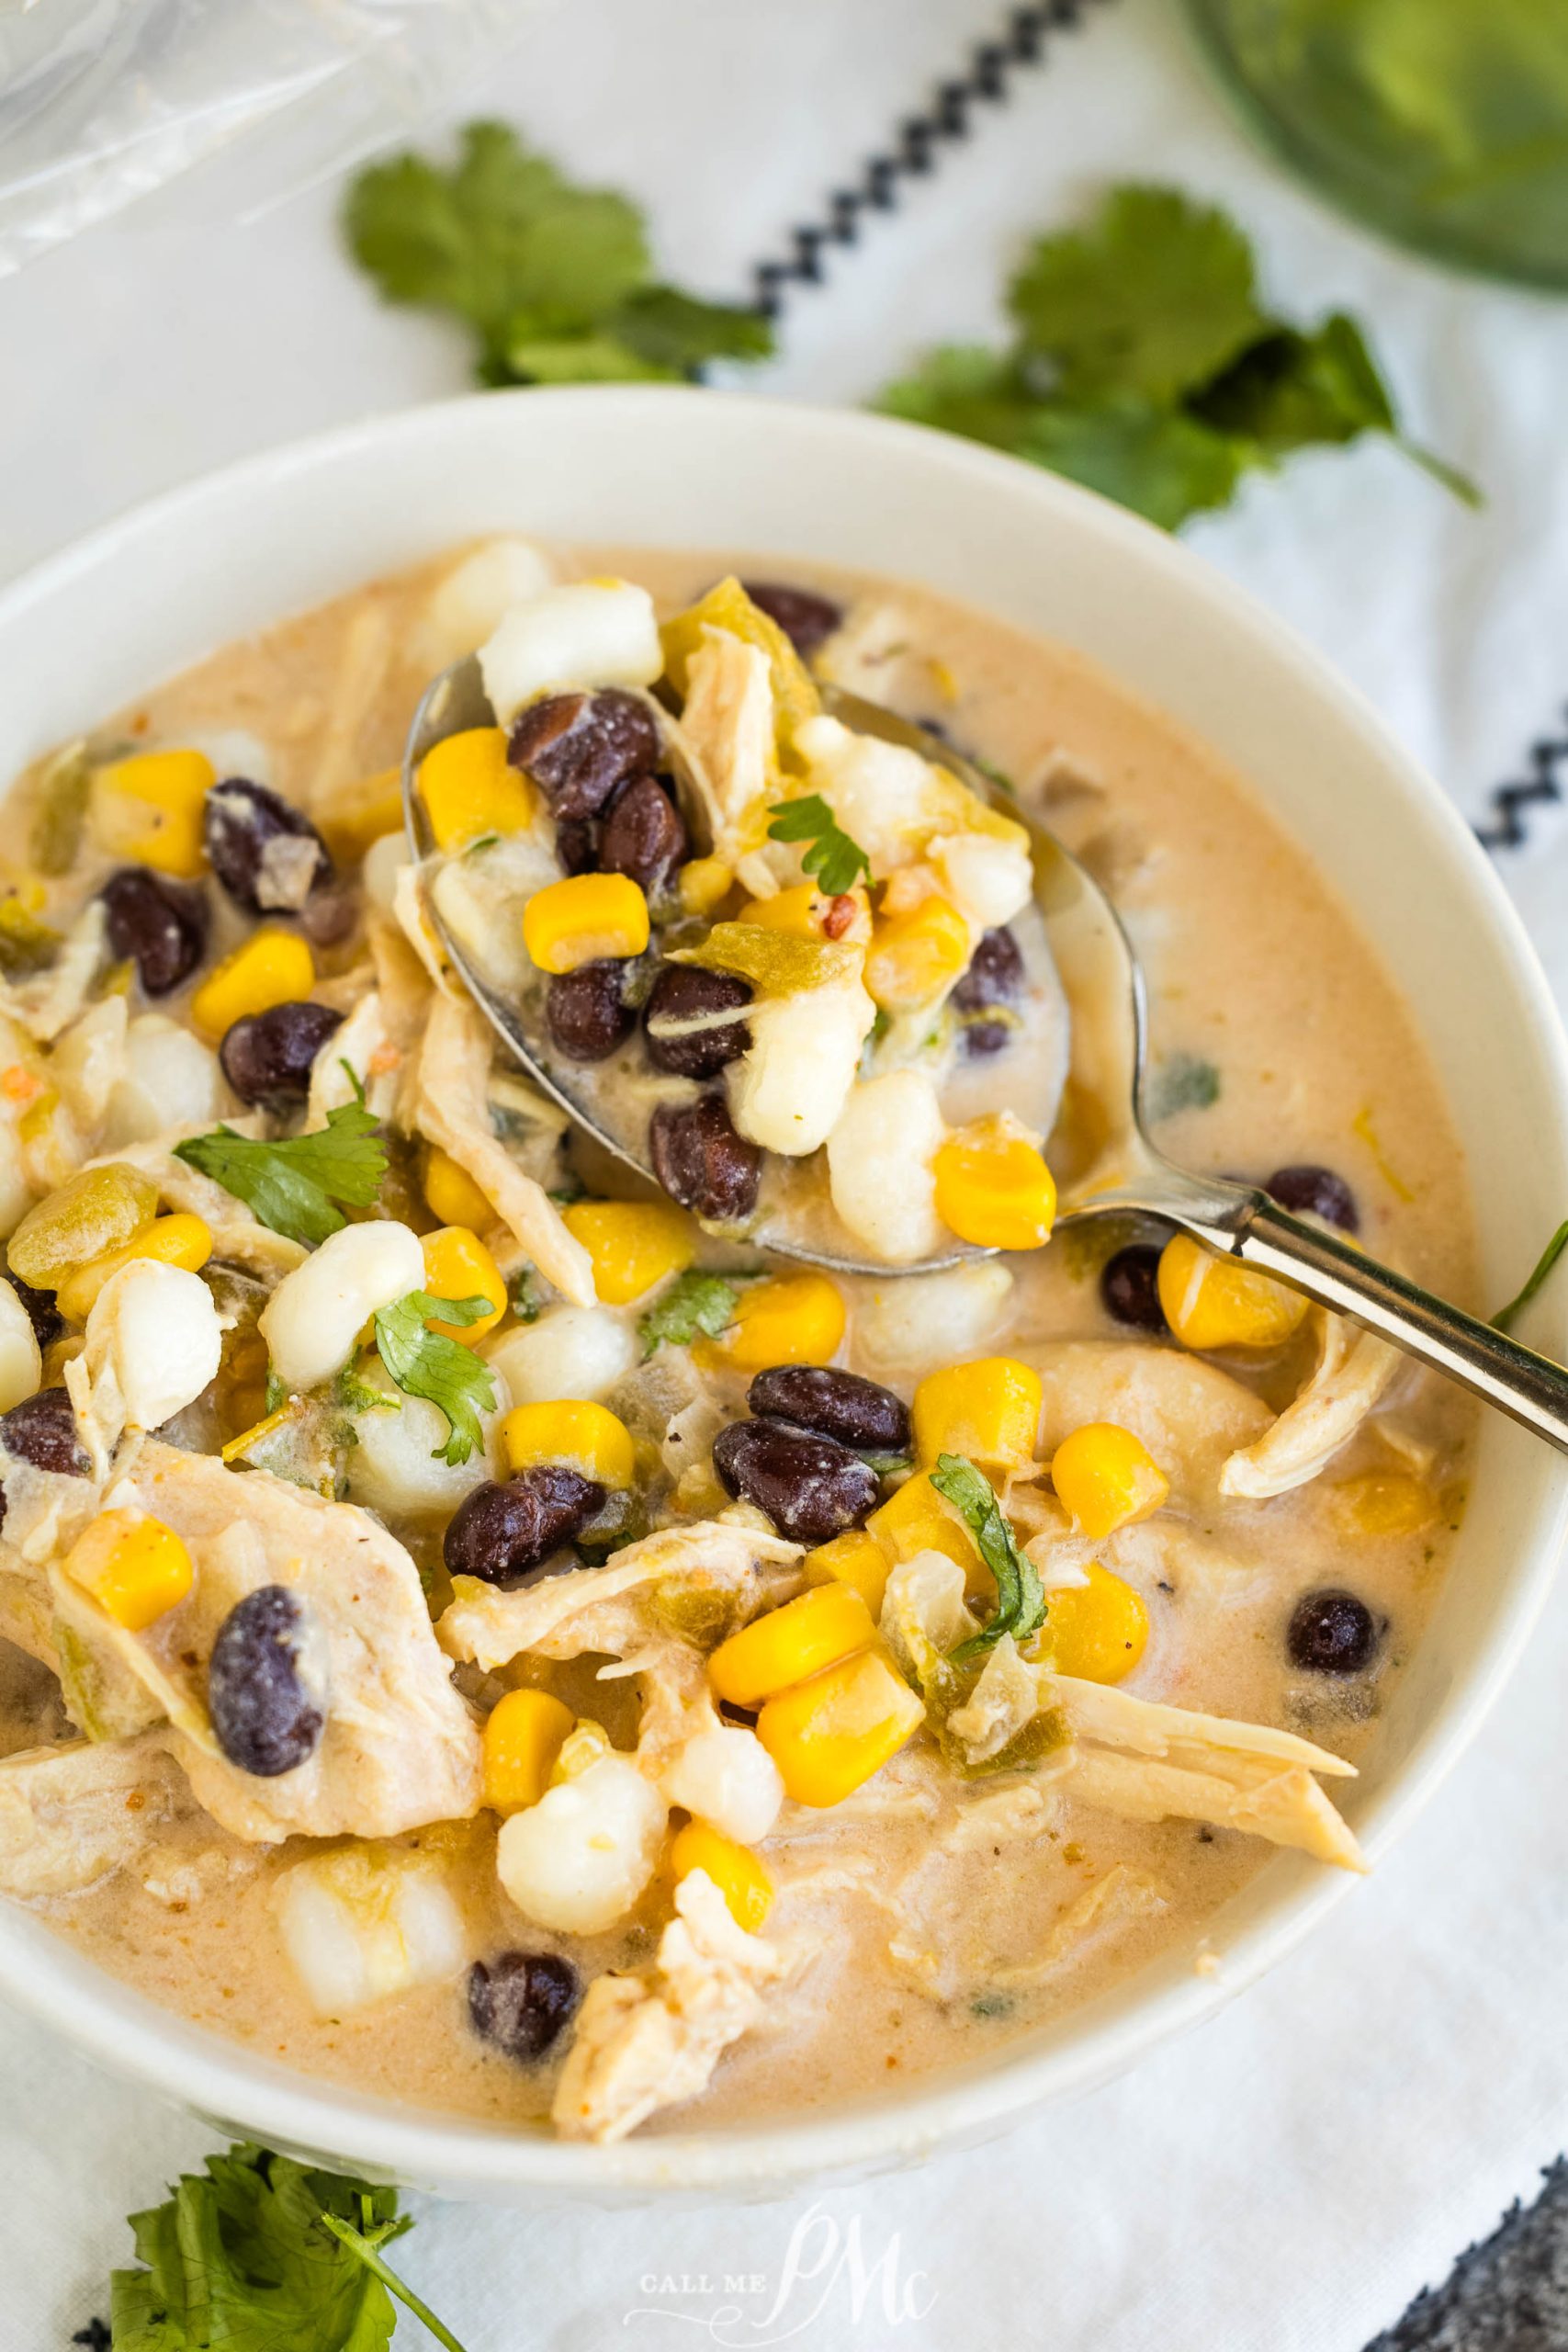 Creamy Chicken Hominy Soupin a bowl with corn and black beans.